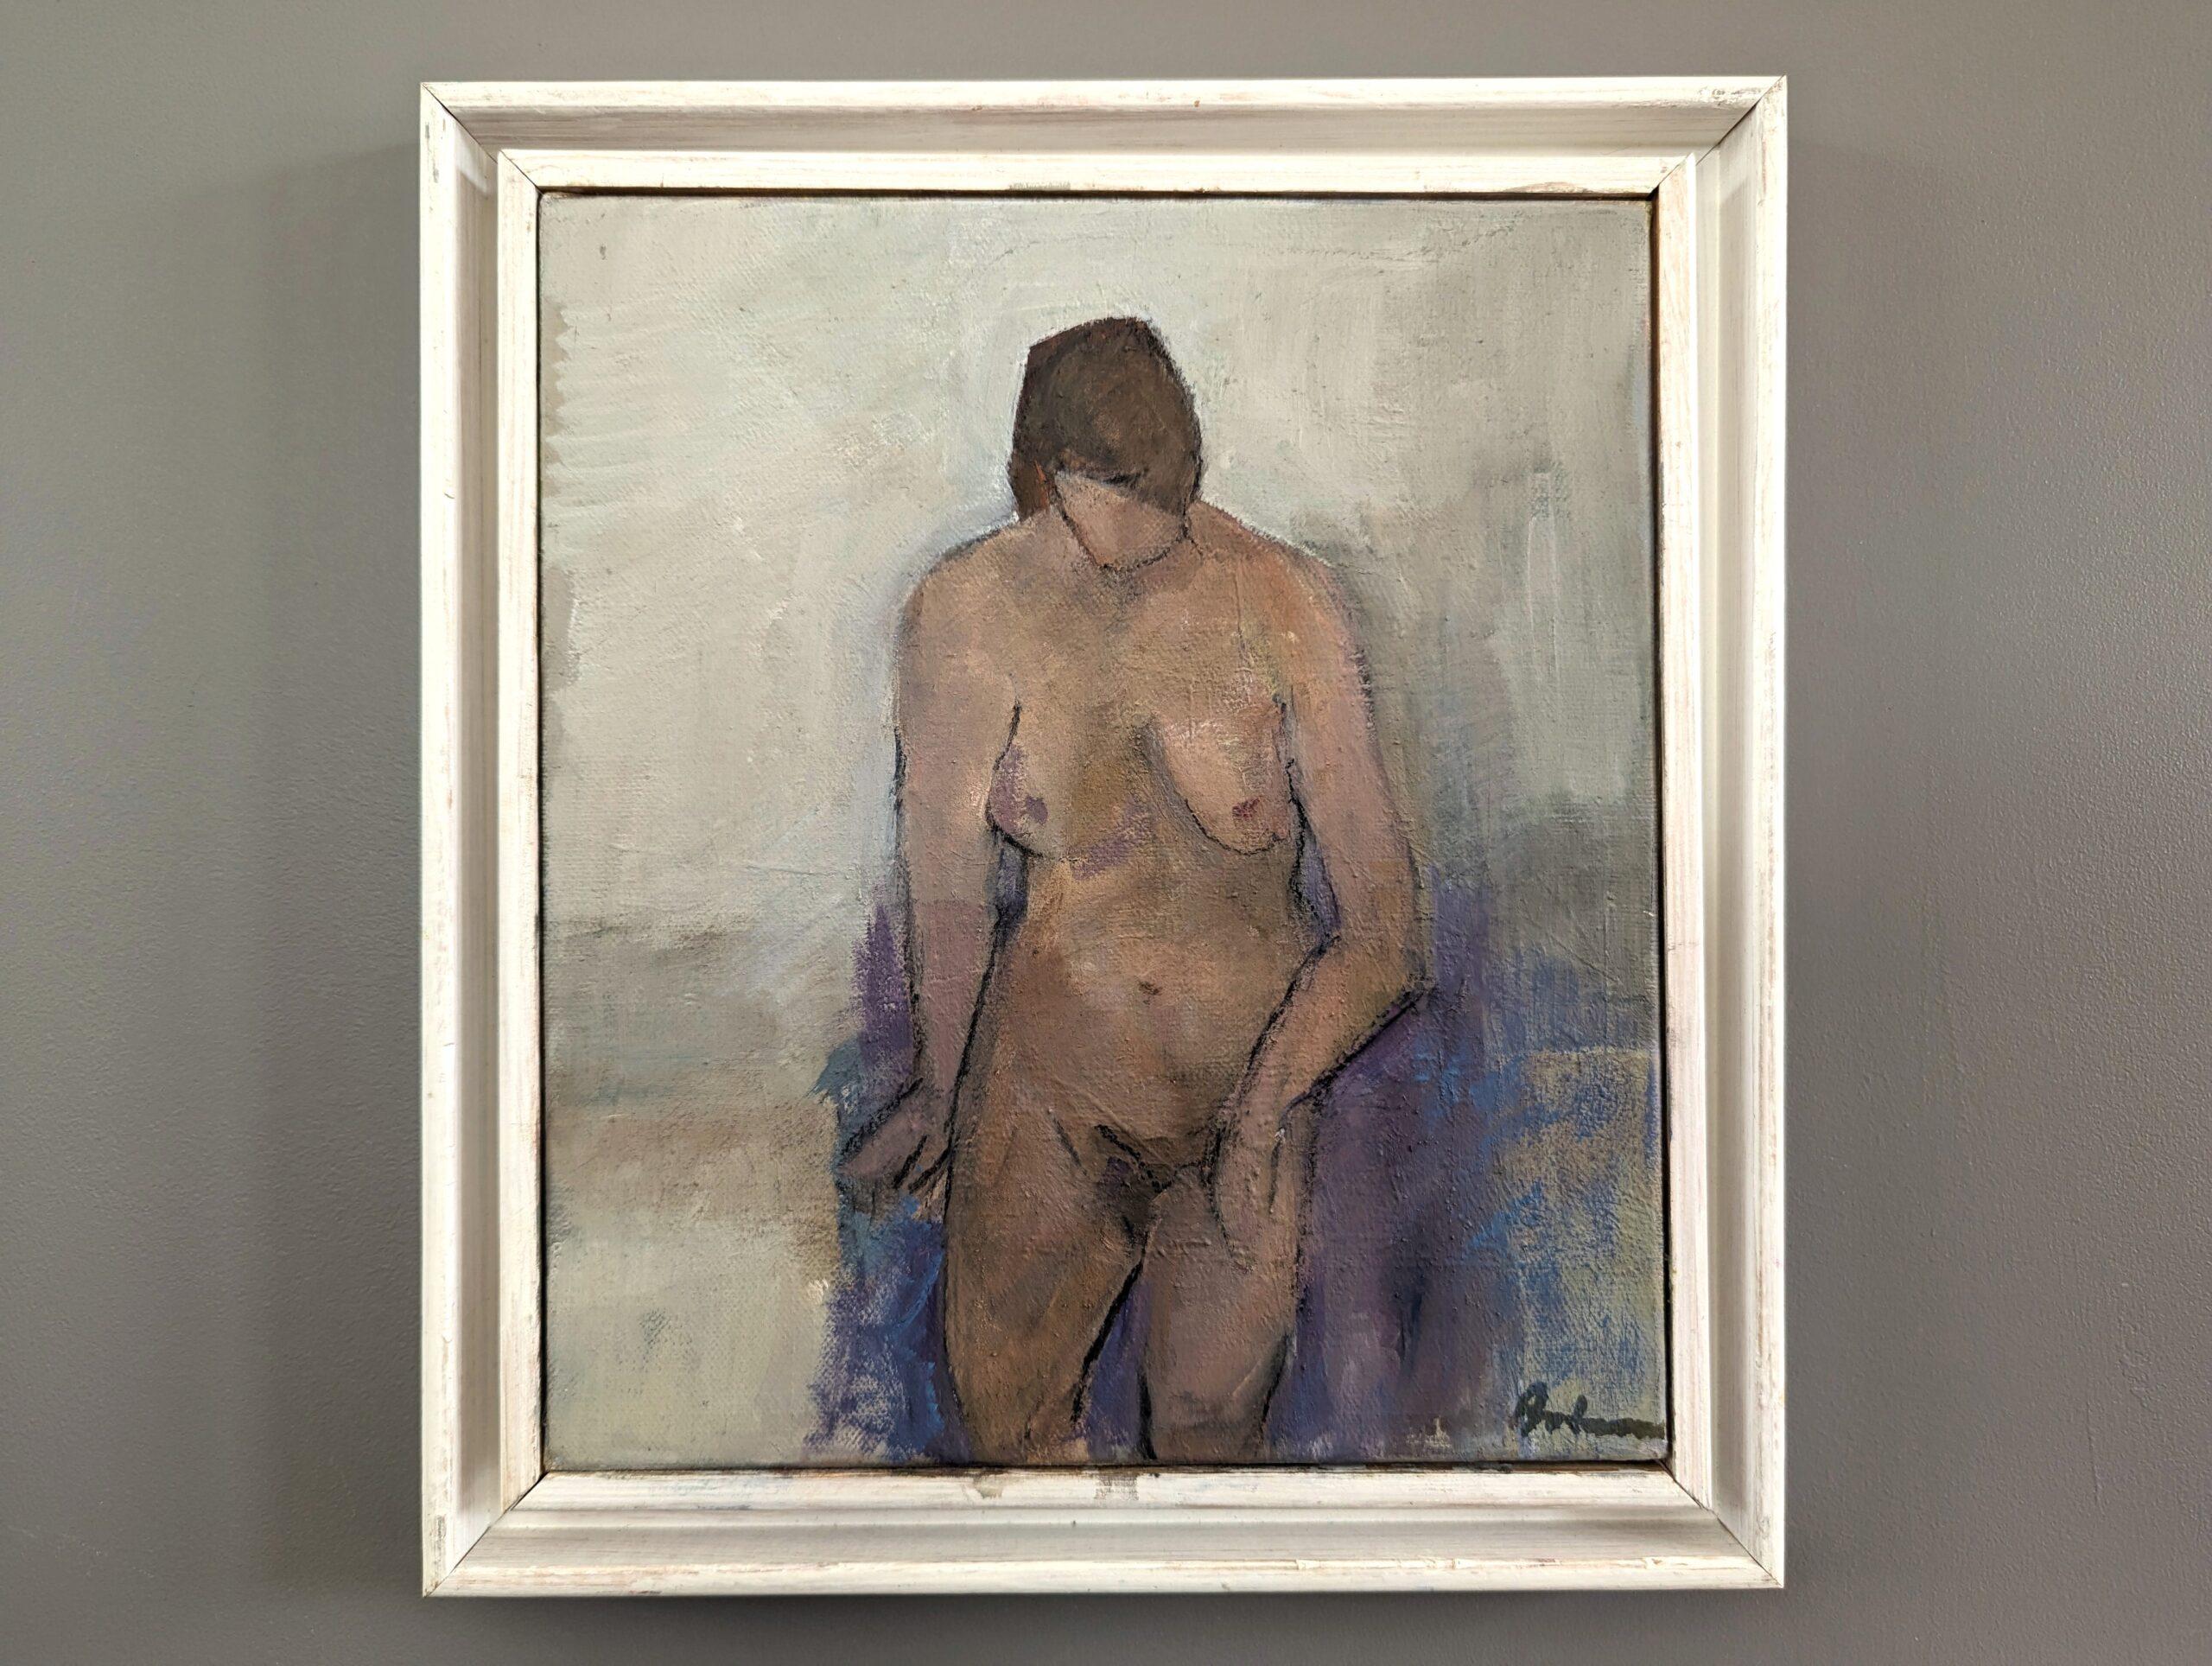 NUDE ON PURPLE CHAIR
Oil on Canvas 
Size: 29.5 x 26.5 cm (including frame)

A tender and contemplative composition of a nude portrait, painted in oil onto canvas.

The artist explores the serene presence of a nude female figure, delicately seated on